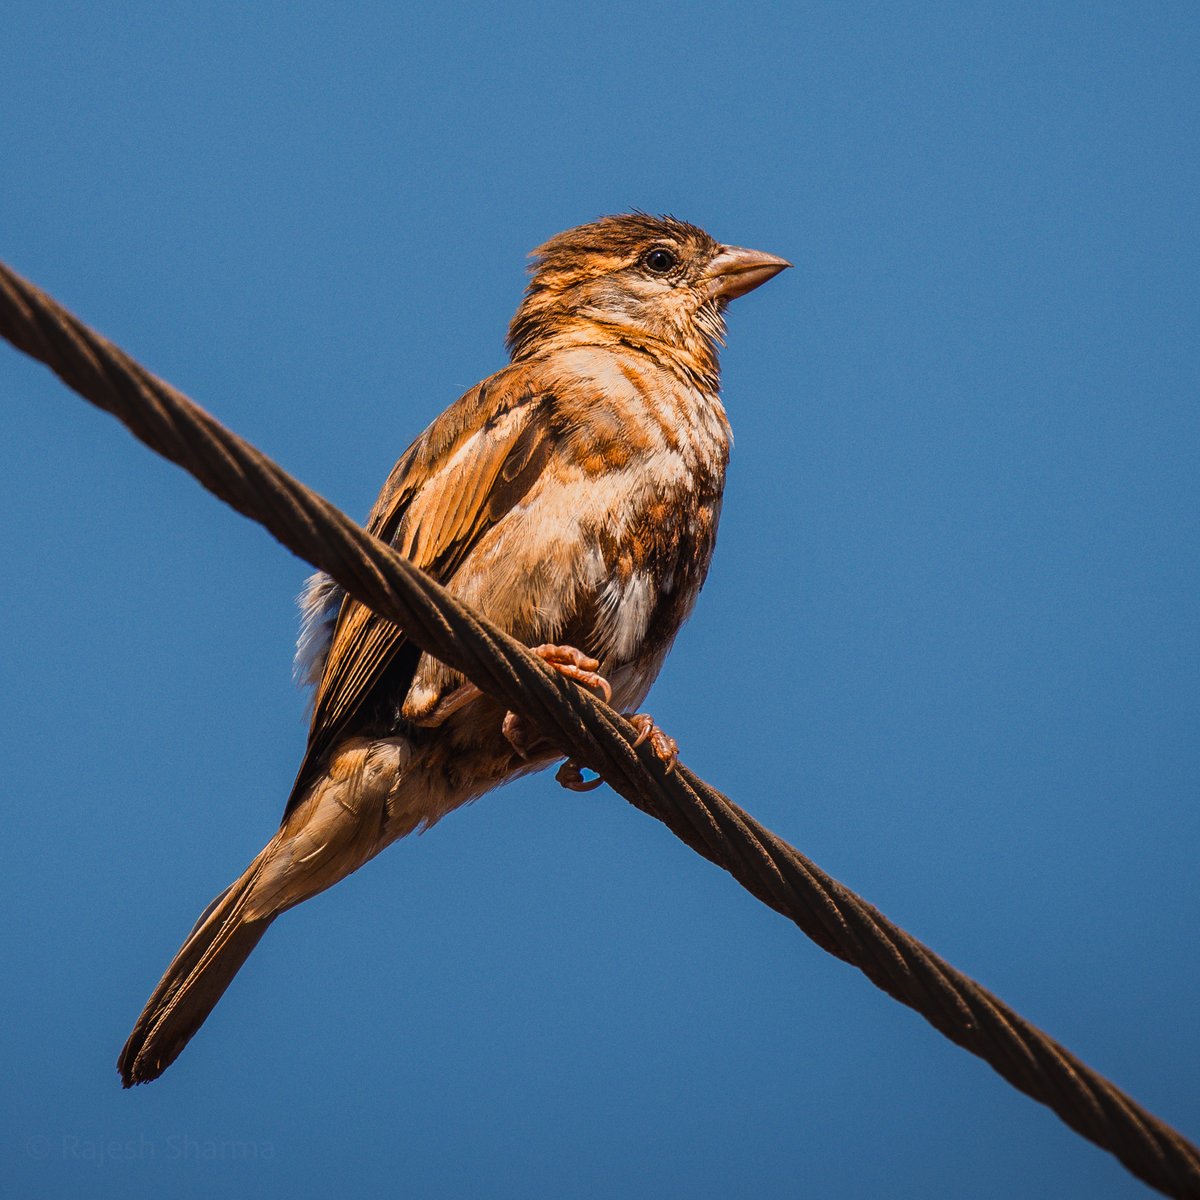 A house sparrow on the electric wire! #BirdsOfTwitter #BirdTwitter #Birds #IndiAves @ThePhotoHour